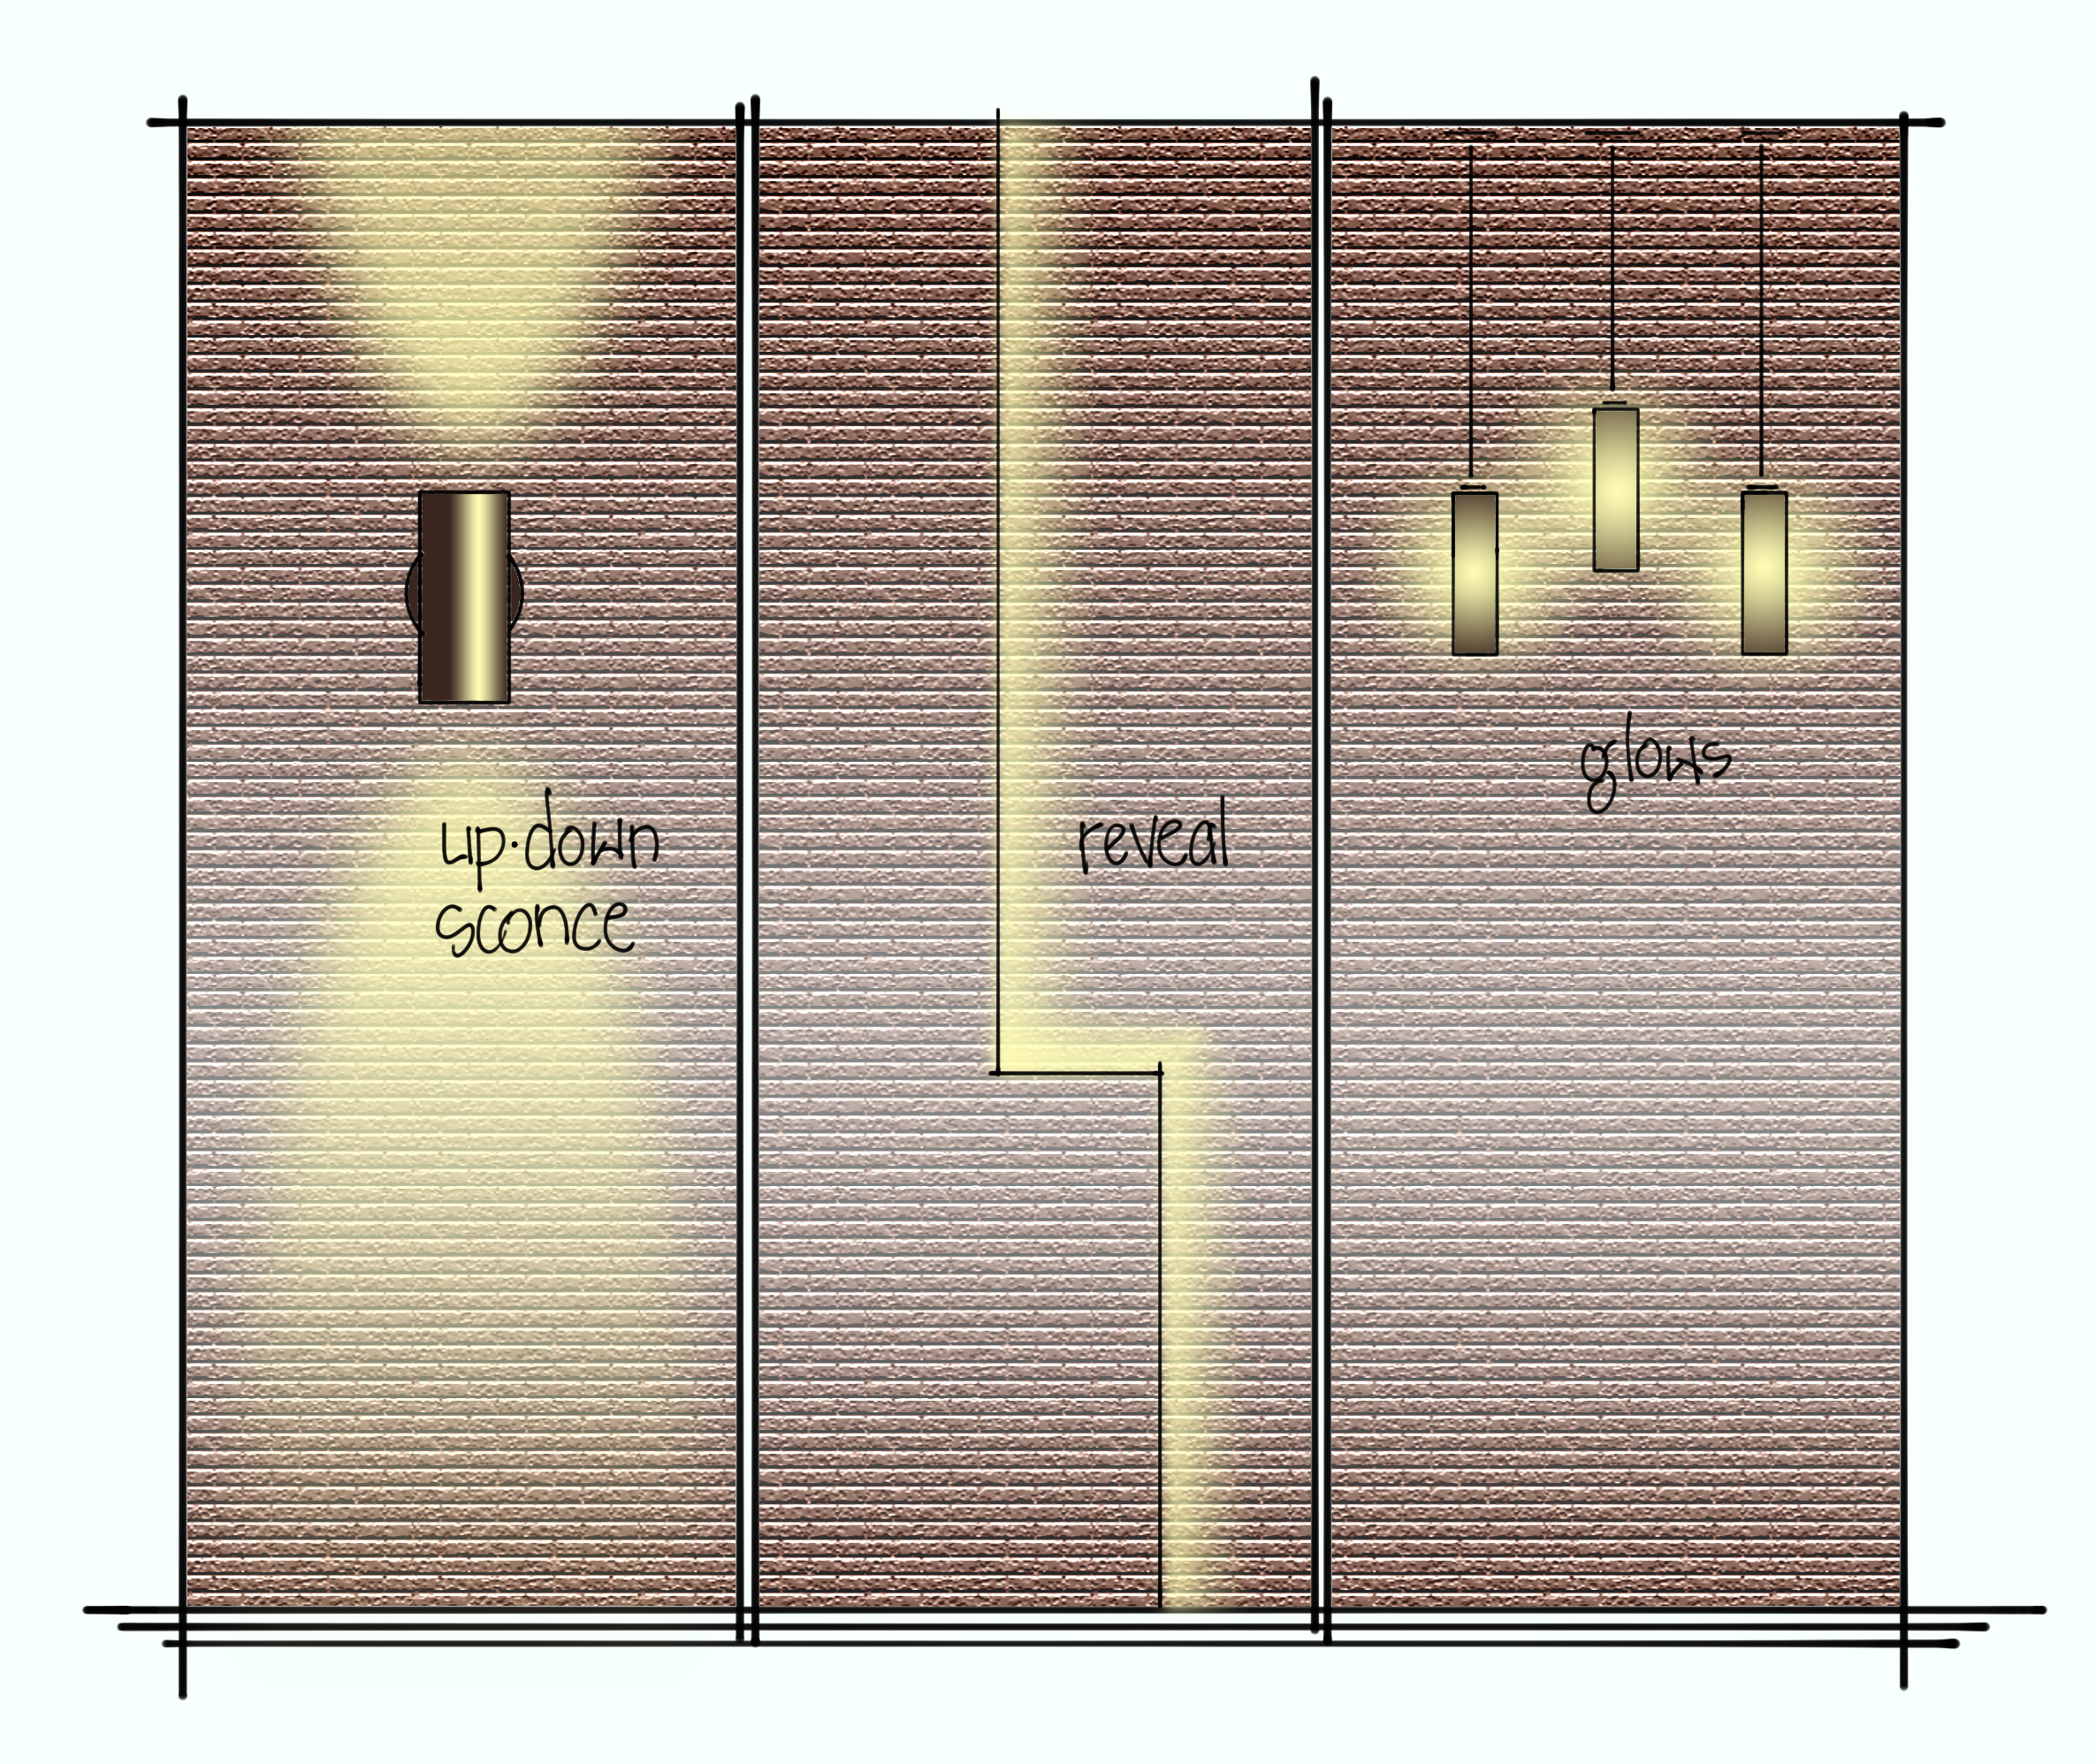 An illustrated diagram featuring three different types of lamps that illuminate stone and brick: up-down sconces, reveal lights, and glows.